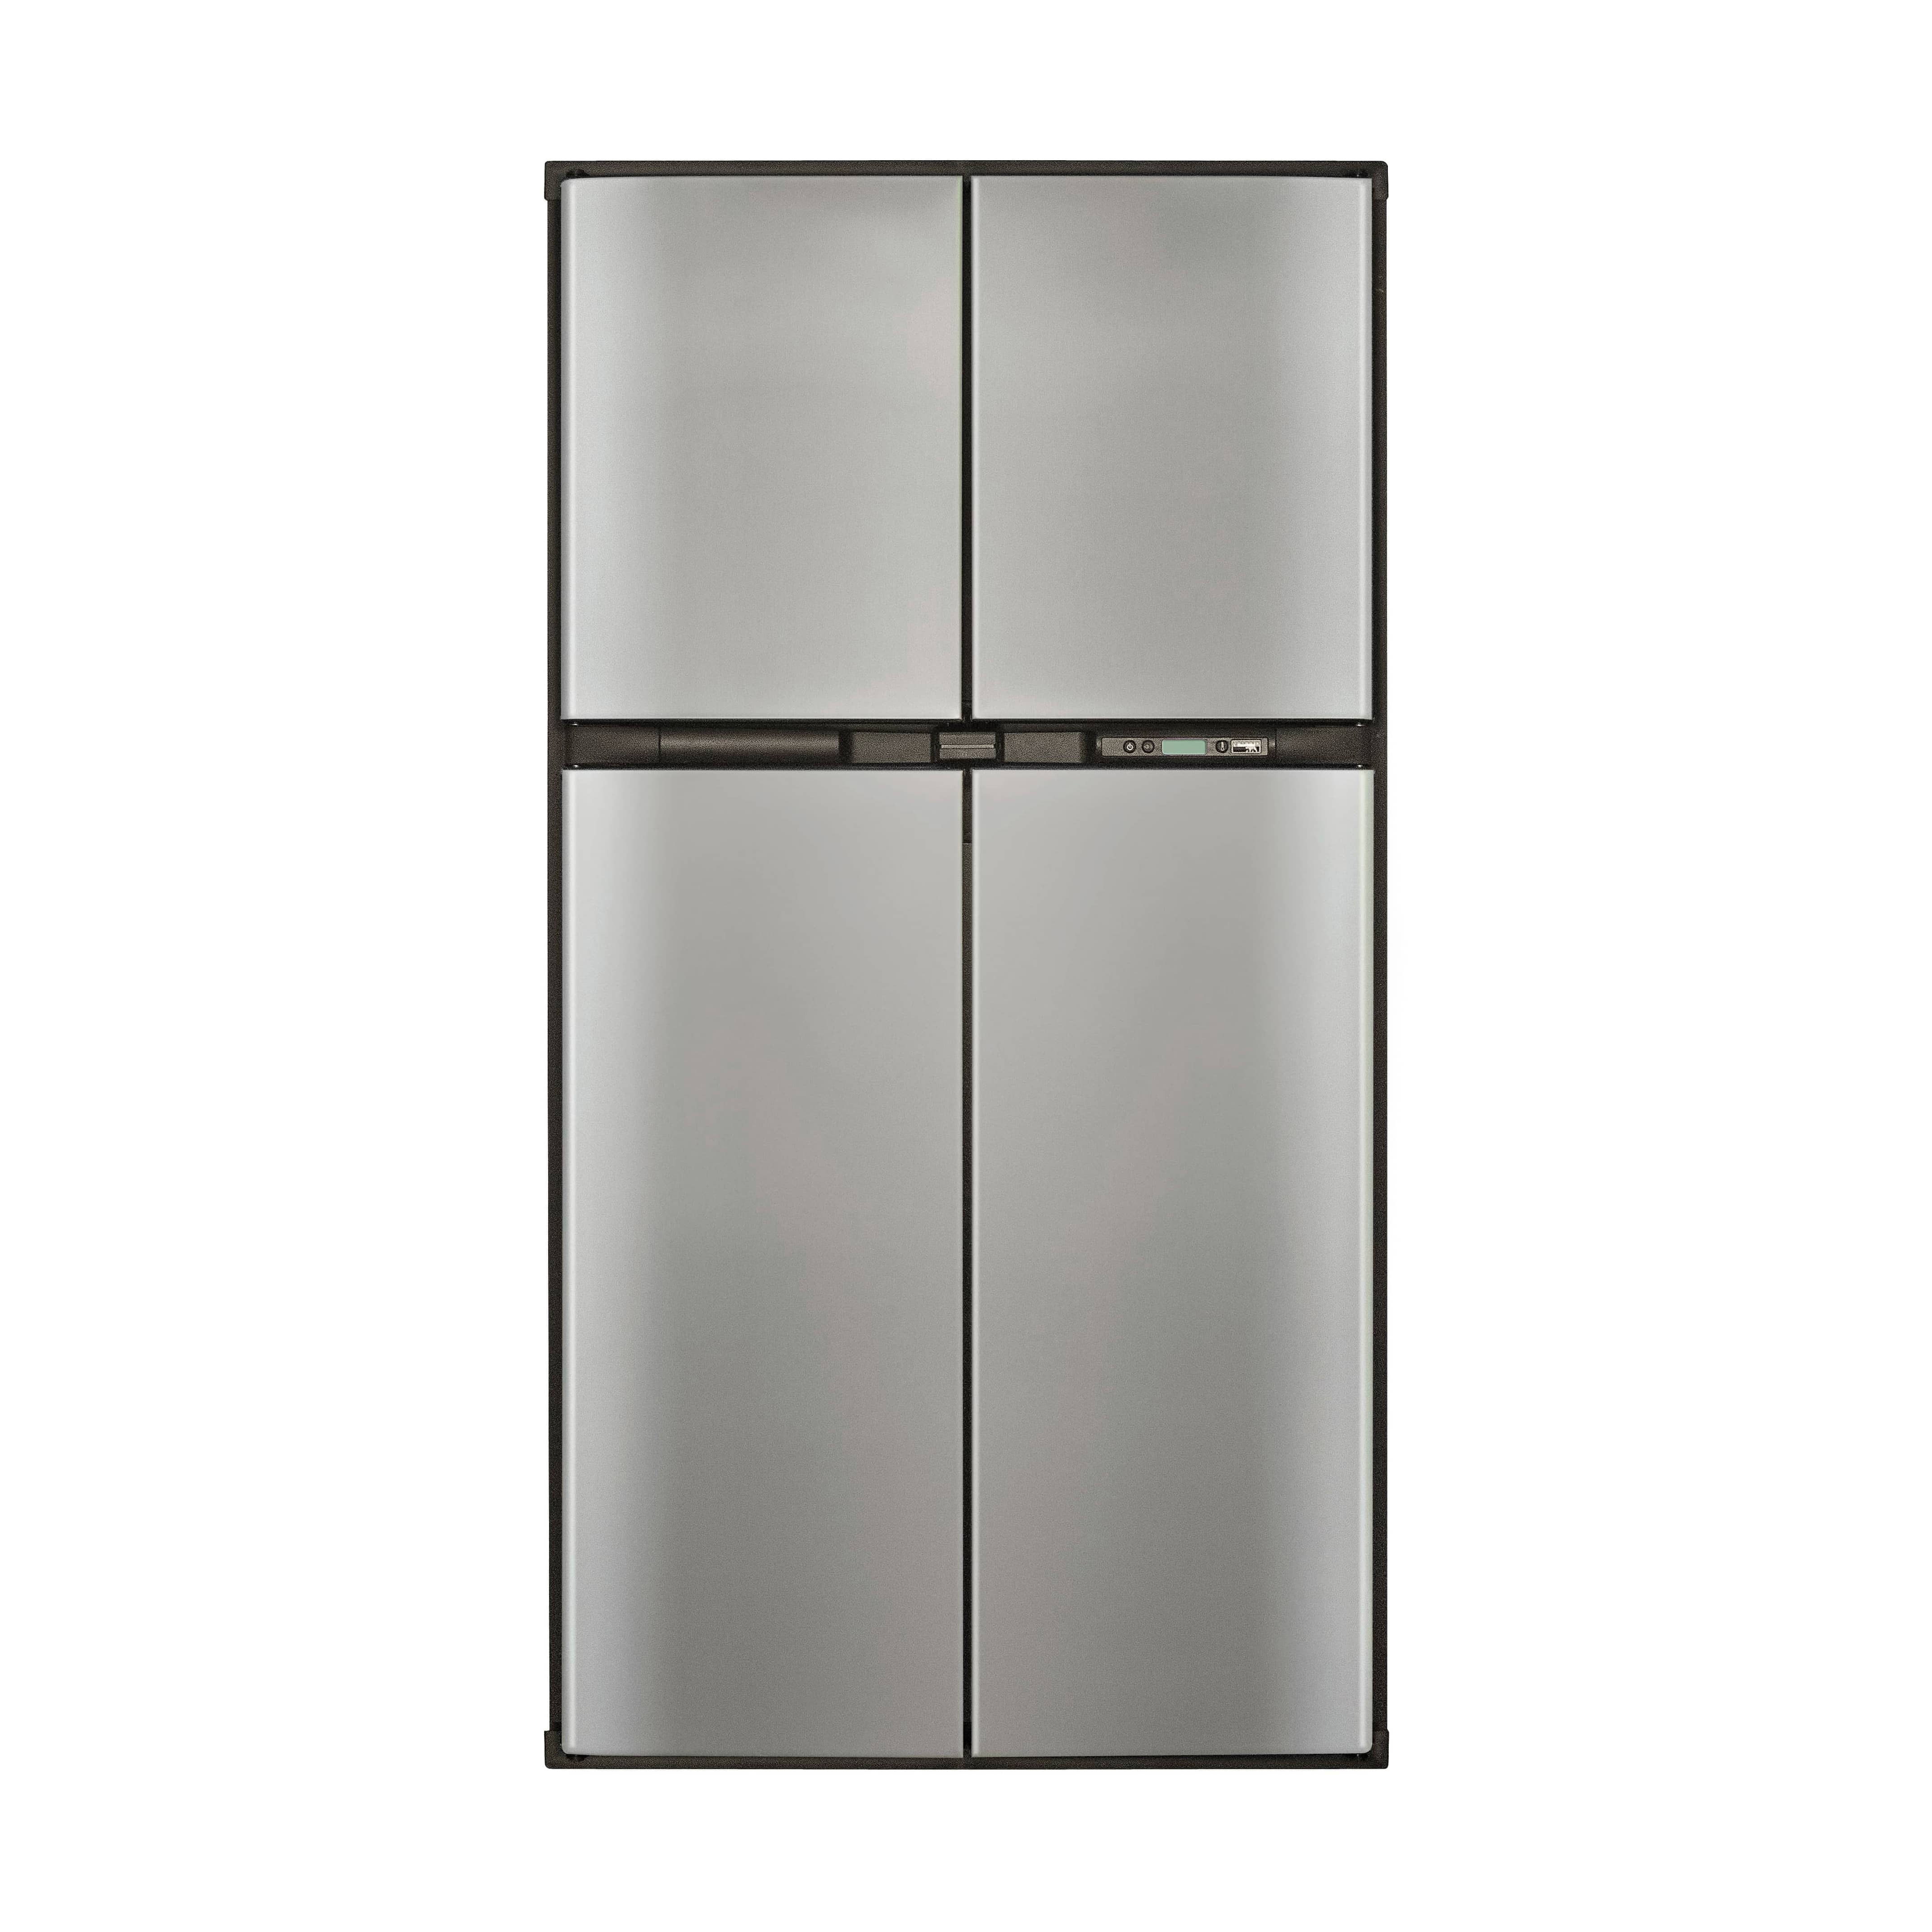 Norcold 8.2 Cubic Feet Dual Compartment 2 Door Refrigerator With Freezer ,  Silver